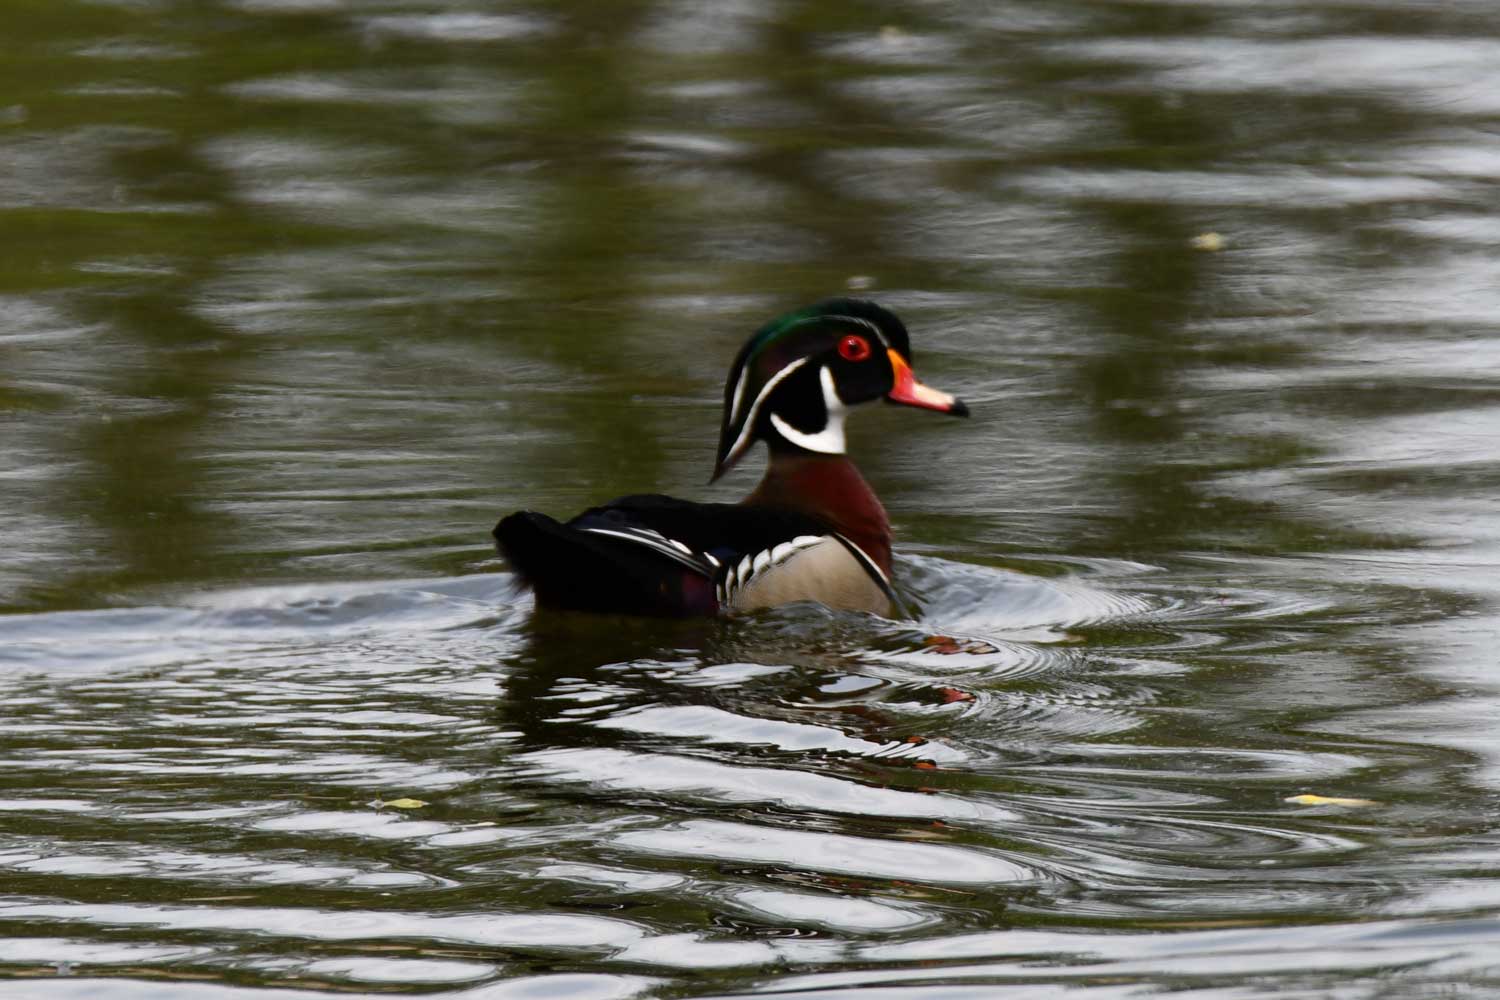 Wood duck in the water.